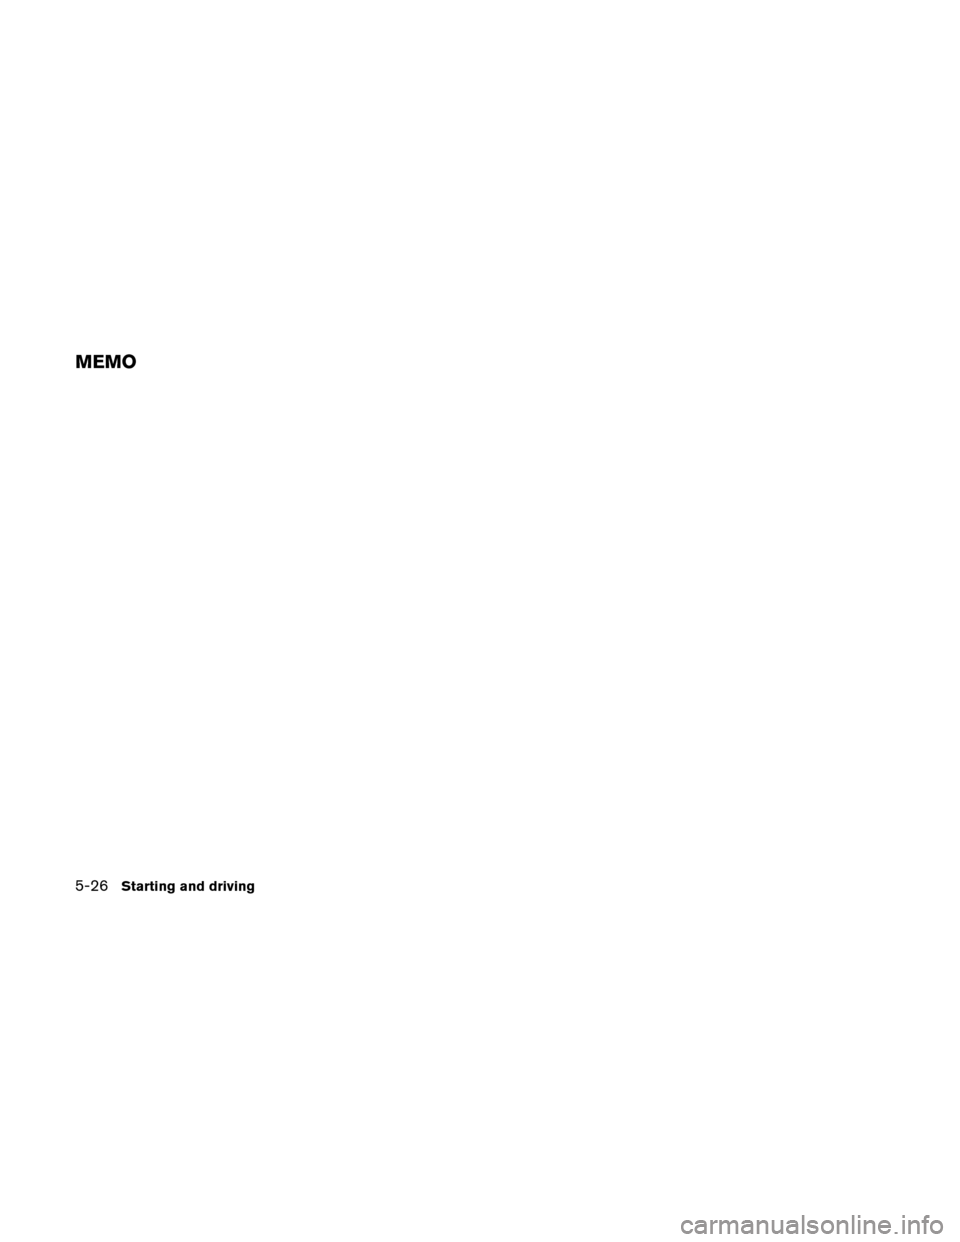 NISSAN ALTIMA HYBRID 2010 L32A / 4.G Owners Manual MEMO
5-26Starting and driving 